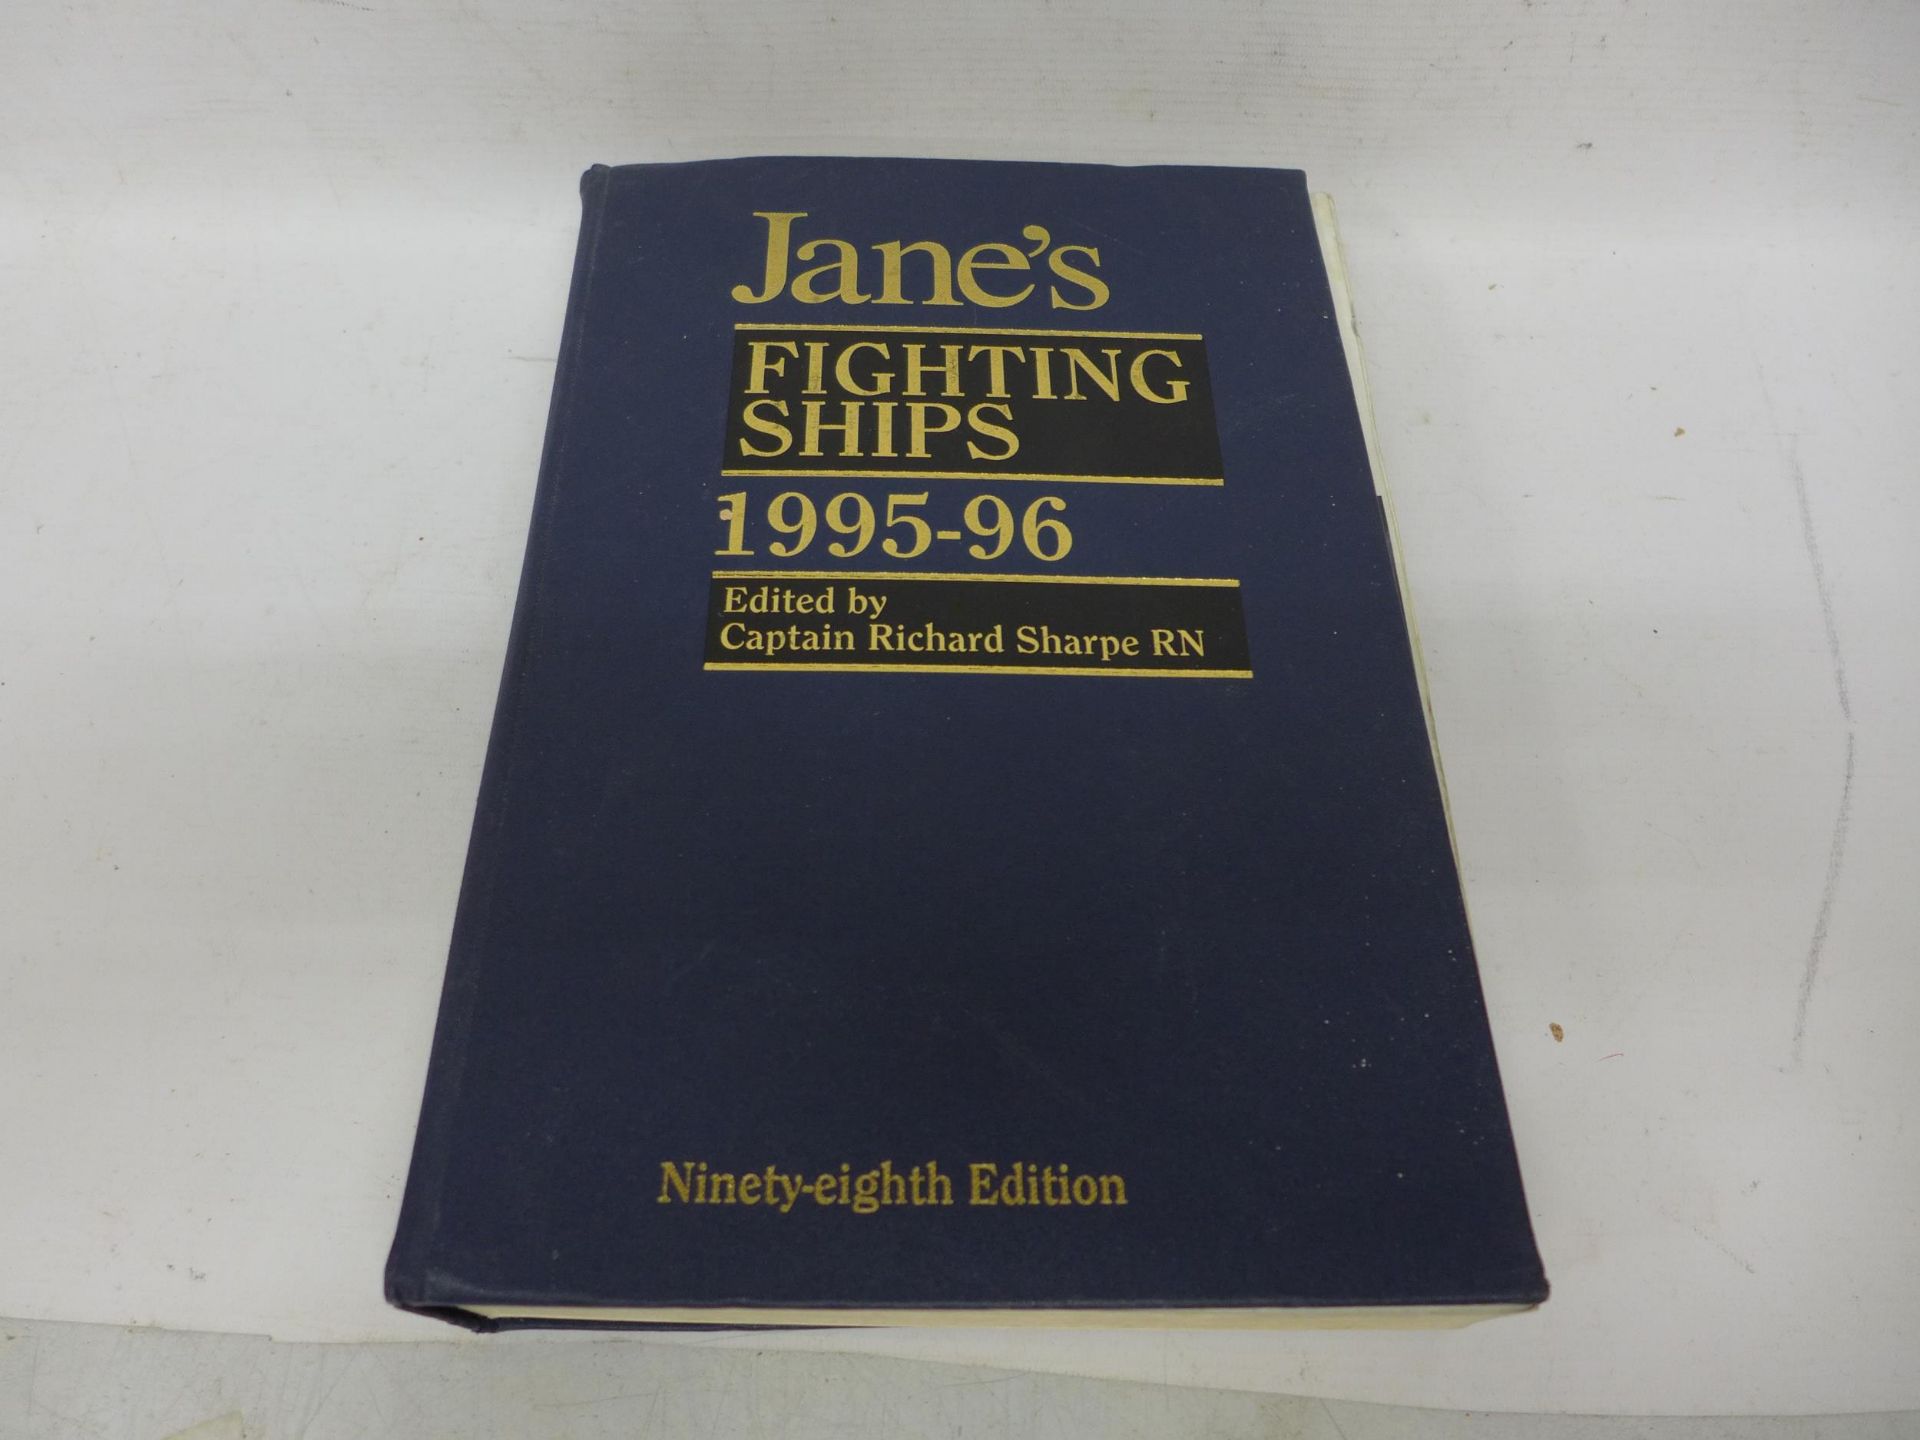 A COPY OF JANE'S FIGHTING SHIPS 1995-96